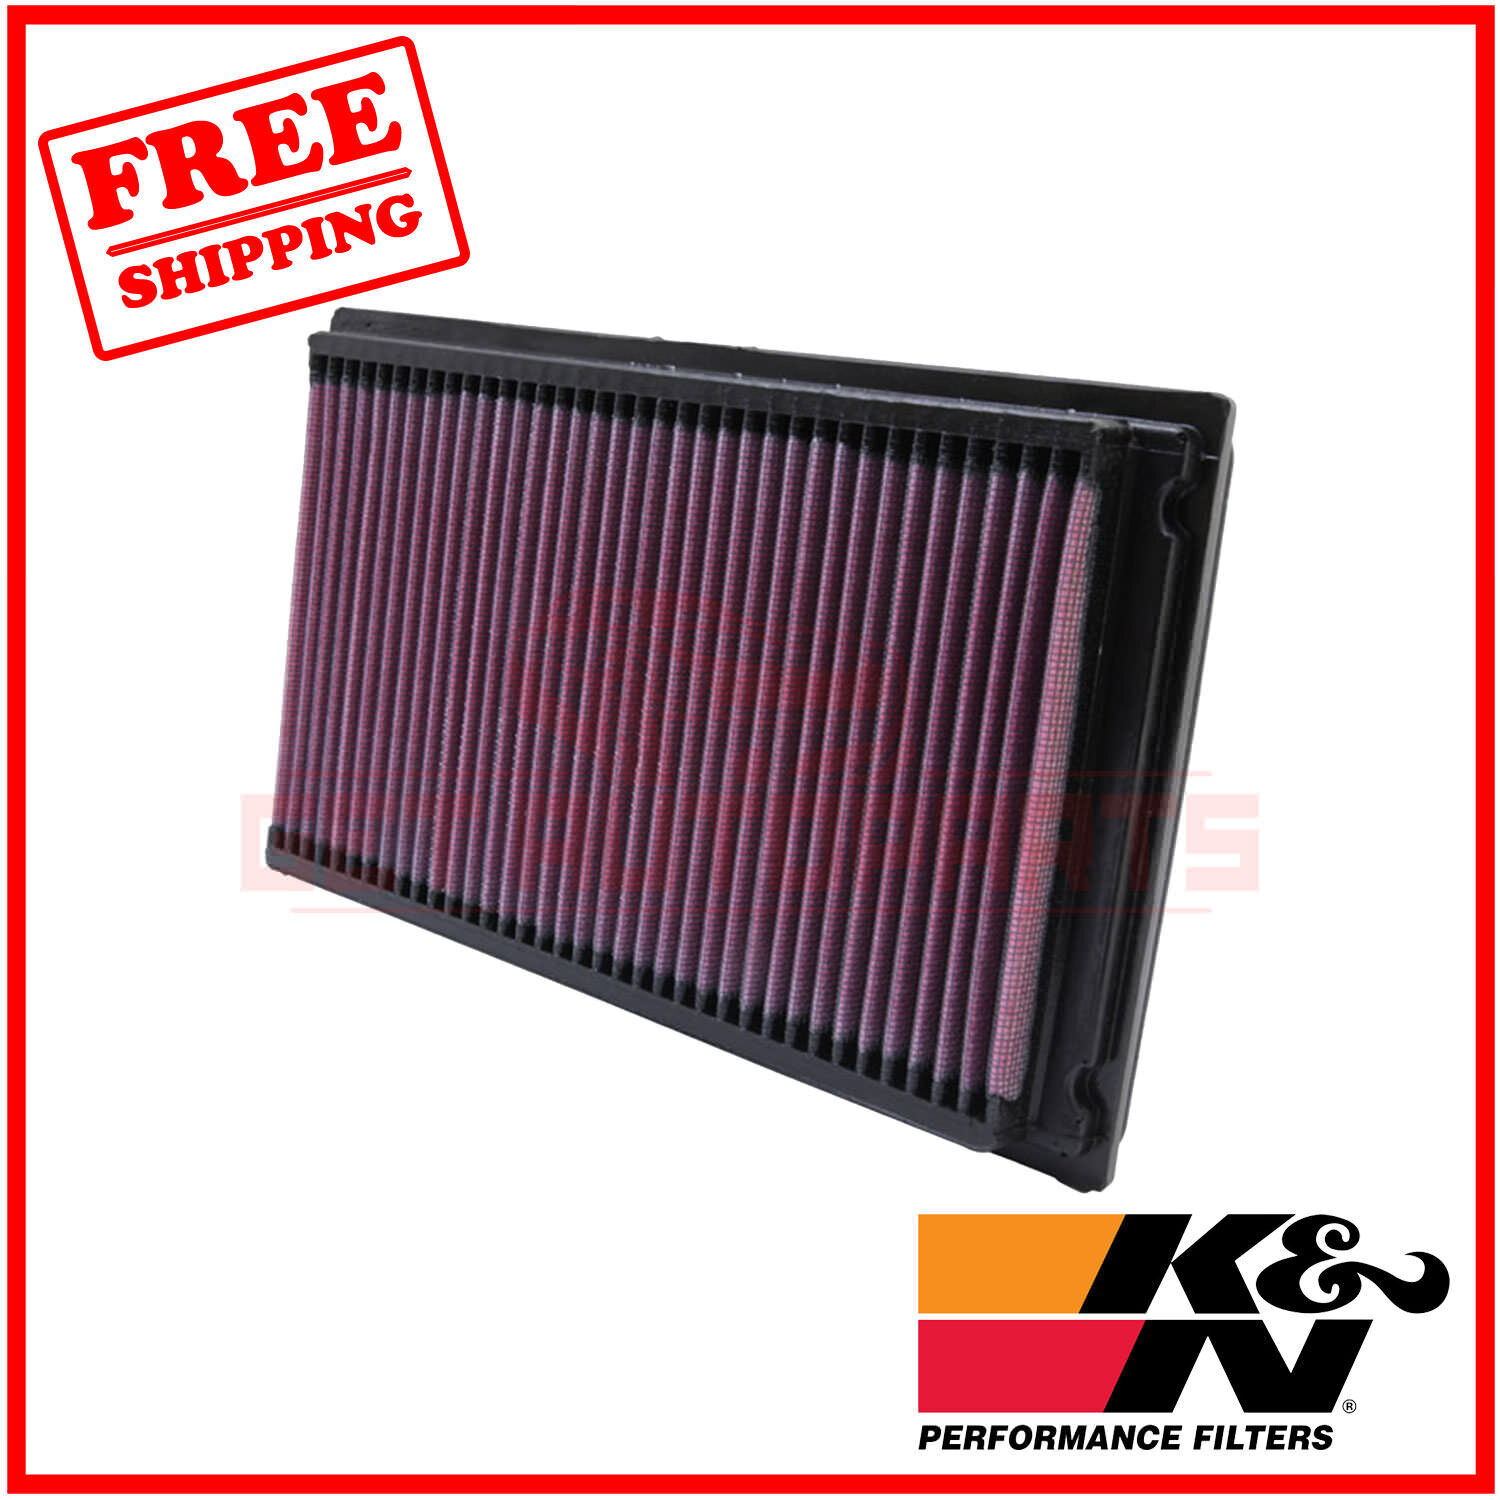 K&N Replacement Air Filter for Nissan Stanza 1990-1992